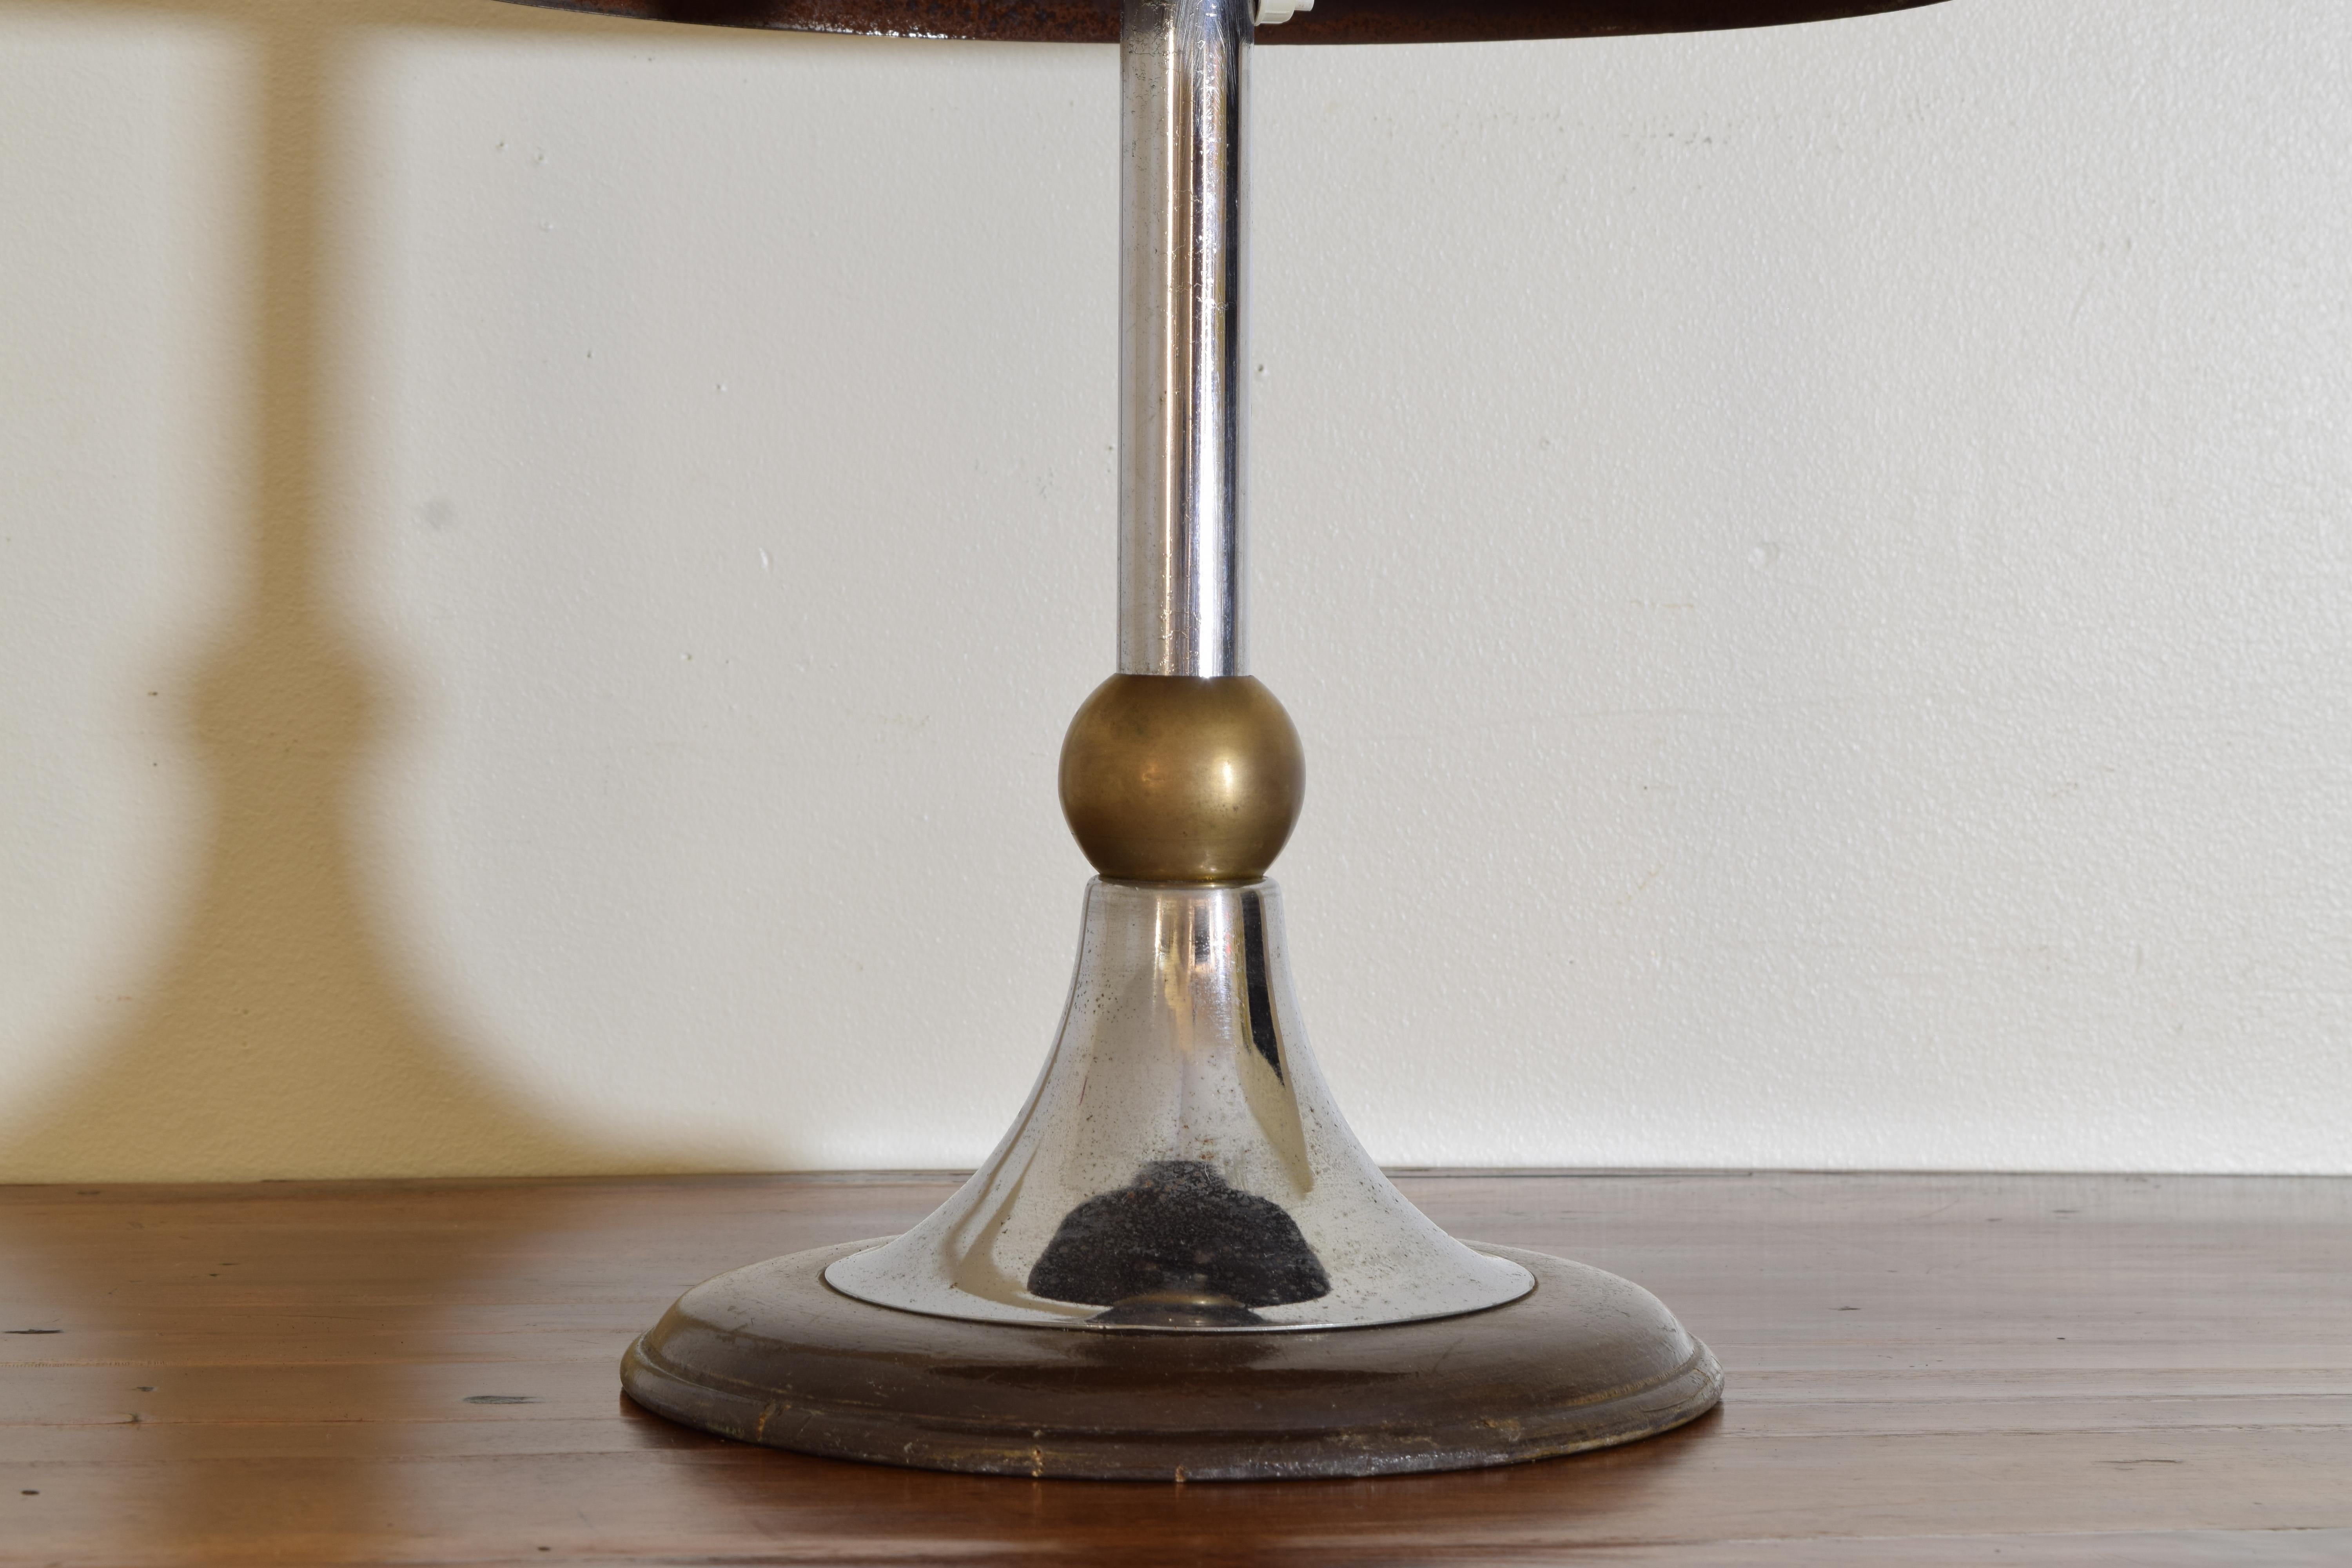 Italian Mid Century Modern Chrome and Brass Table Lamp, early 2nd half 20th cen. For Sale 2